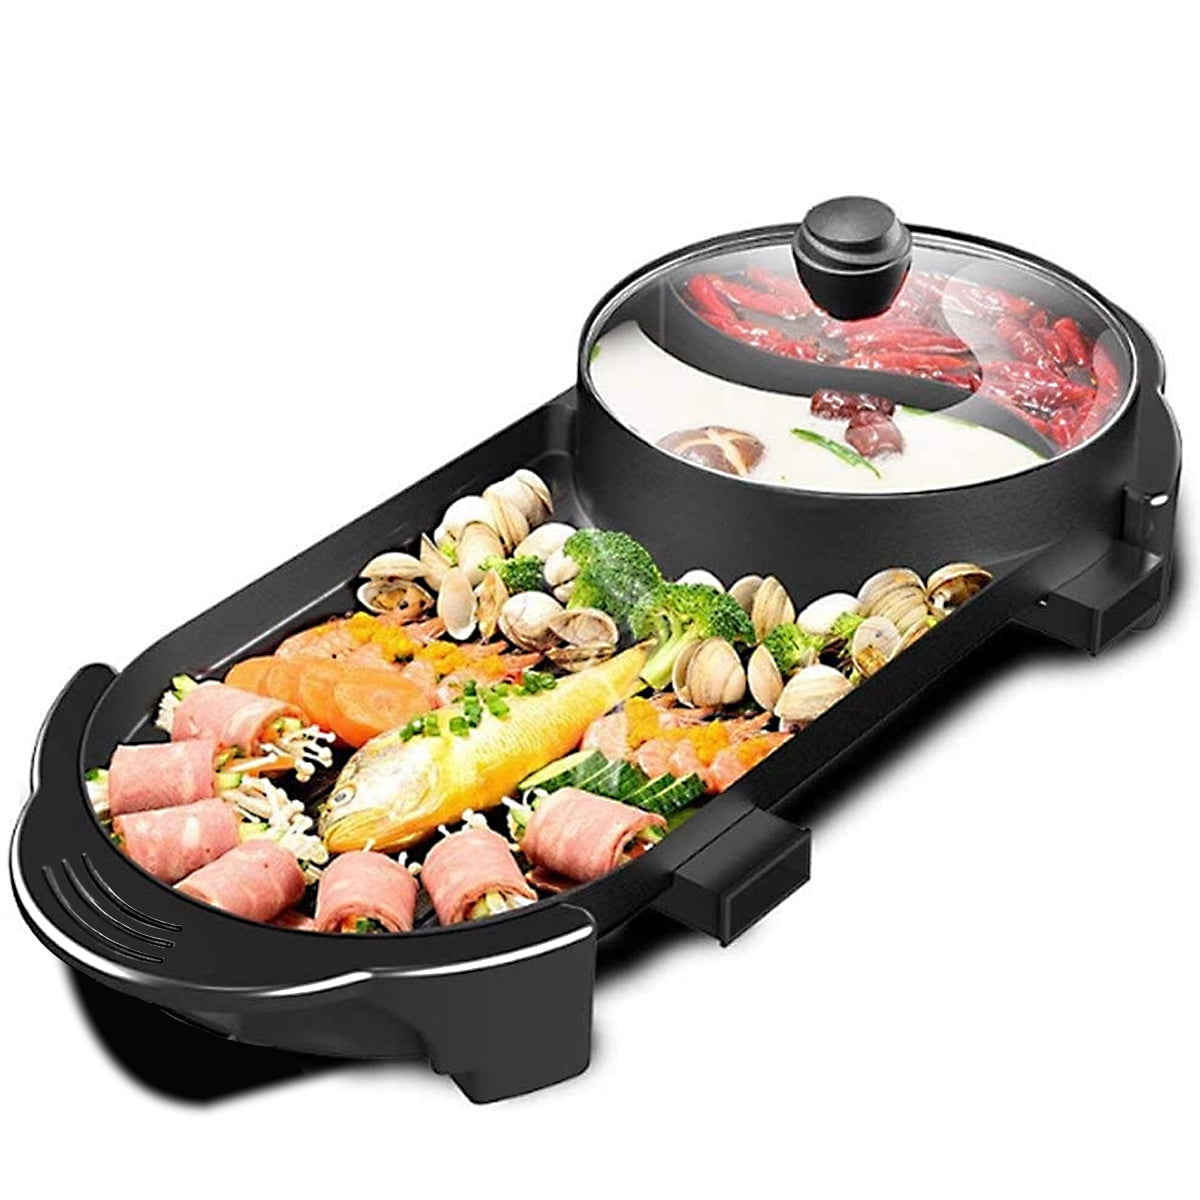 DHJY Shabu Shabu Electric Hot Pot with Divider, Smokeless Hot Pot Grill  with Nonstick Coating Upgraded Electric Grill Hot Pot, for 2-10 People 57.7